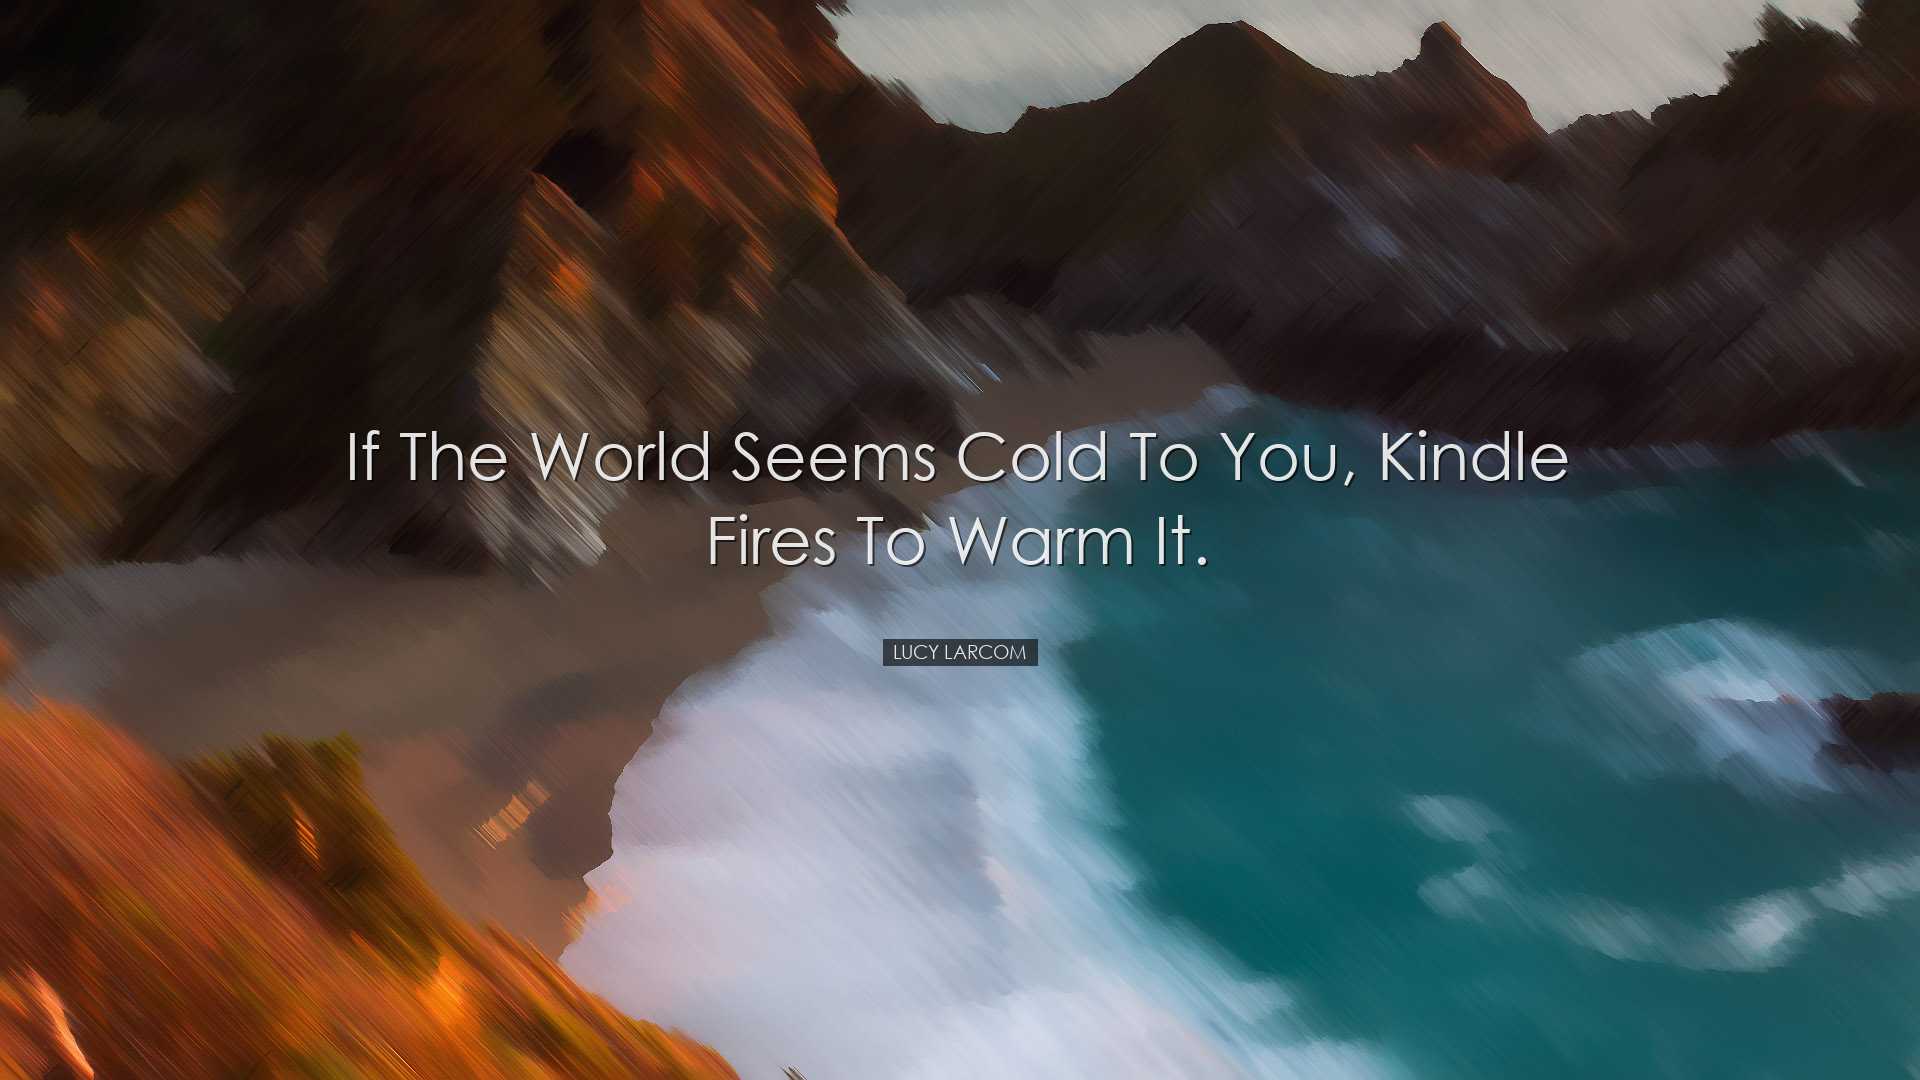 If the world seems cold to you, kindle fires to warm it. - Lucy La